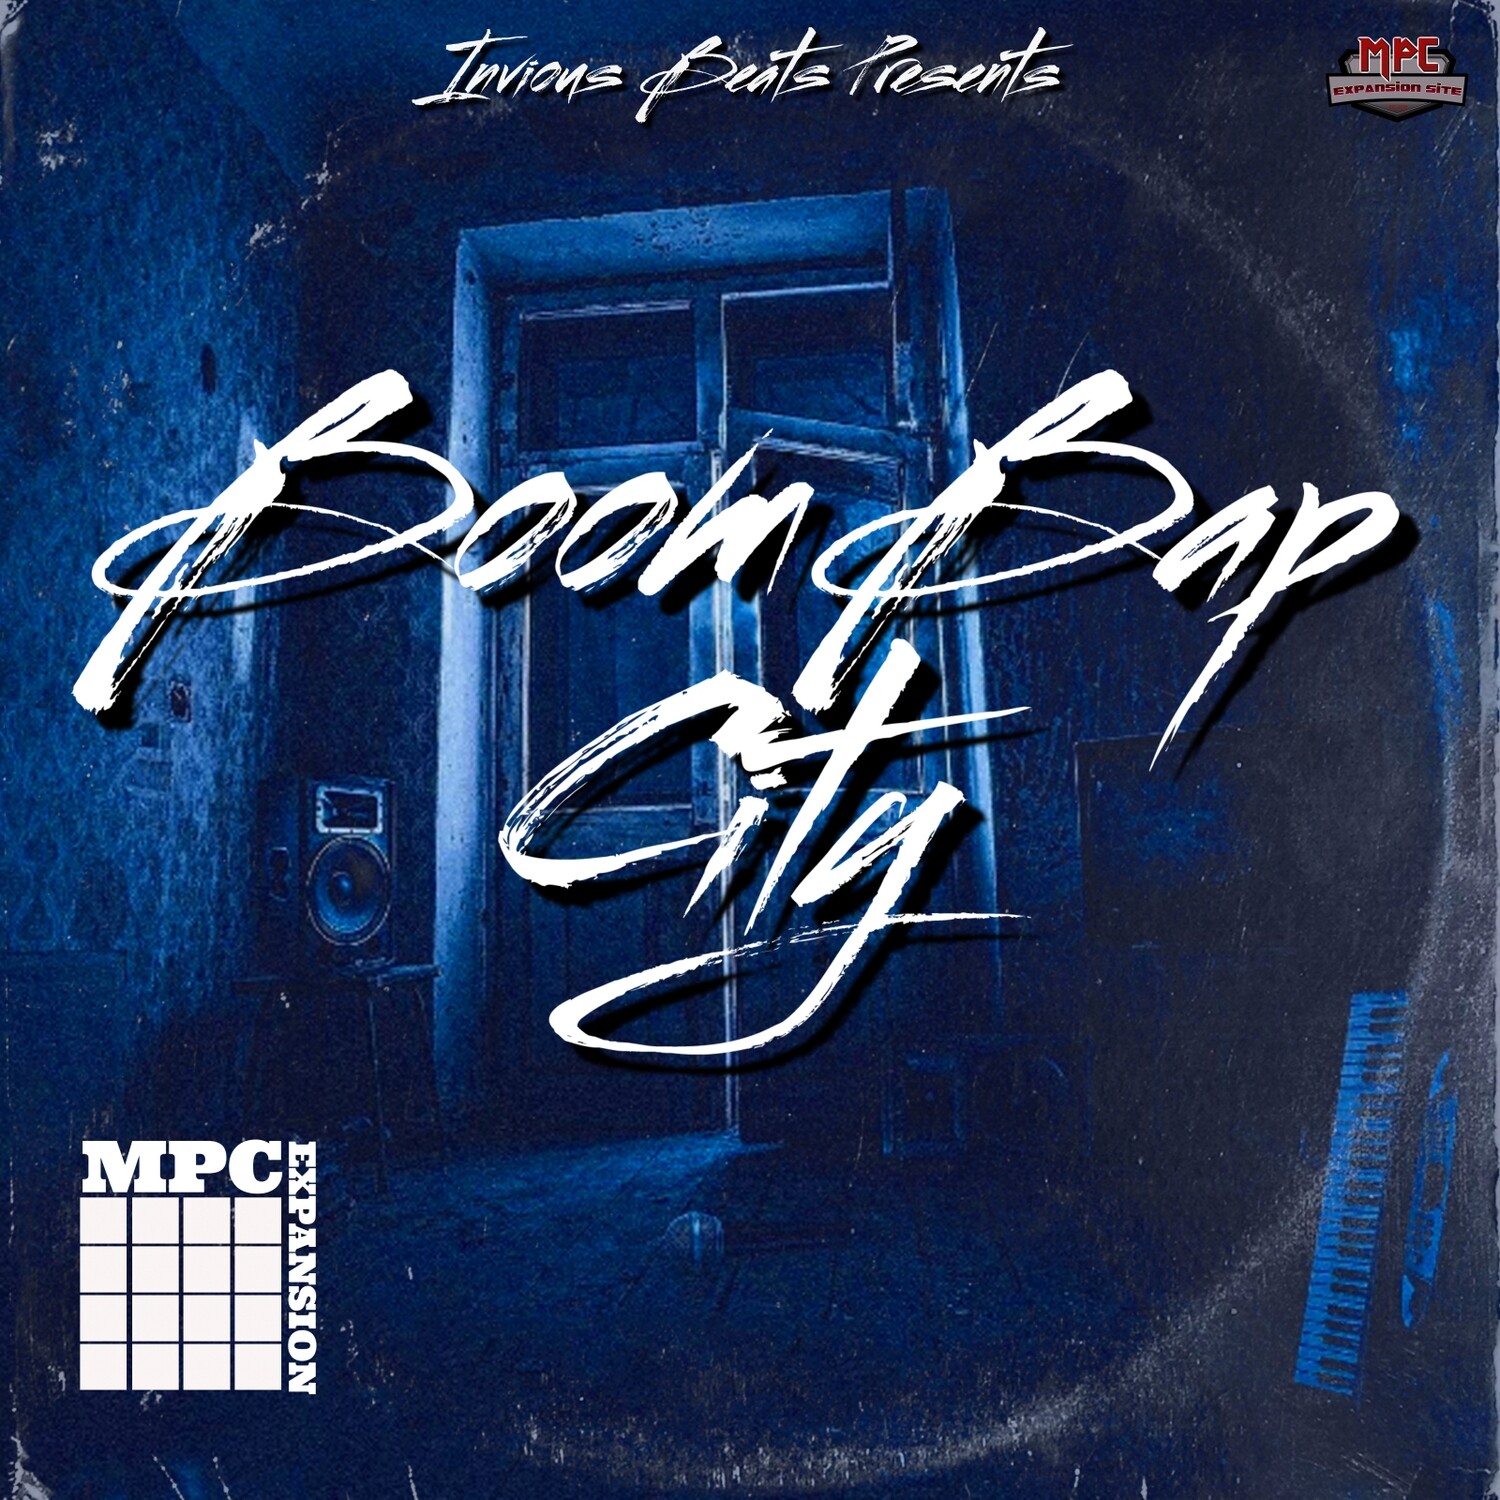 MPC EXPANSION 'BOOMBAP CITY' by INVIOUS